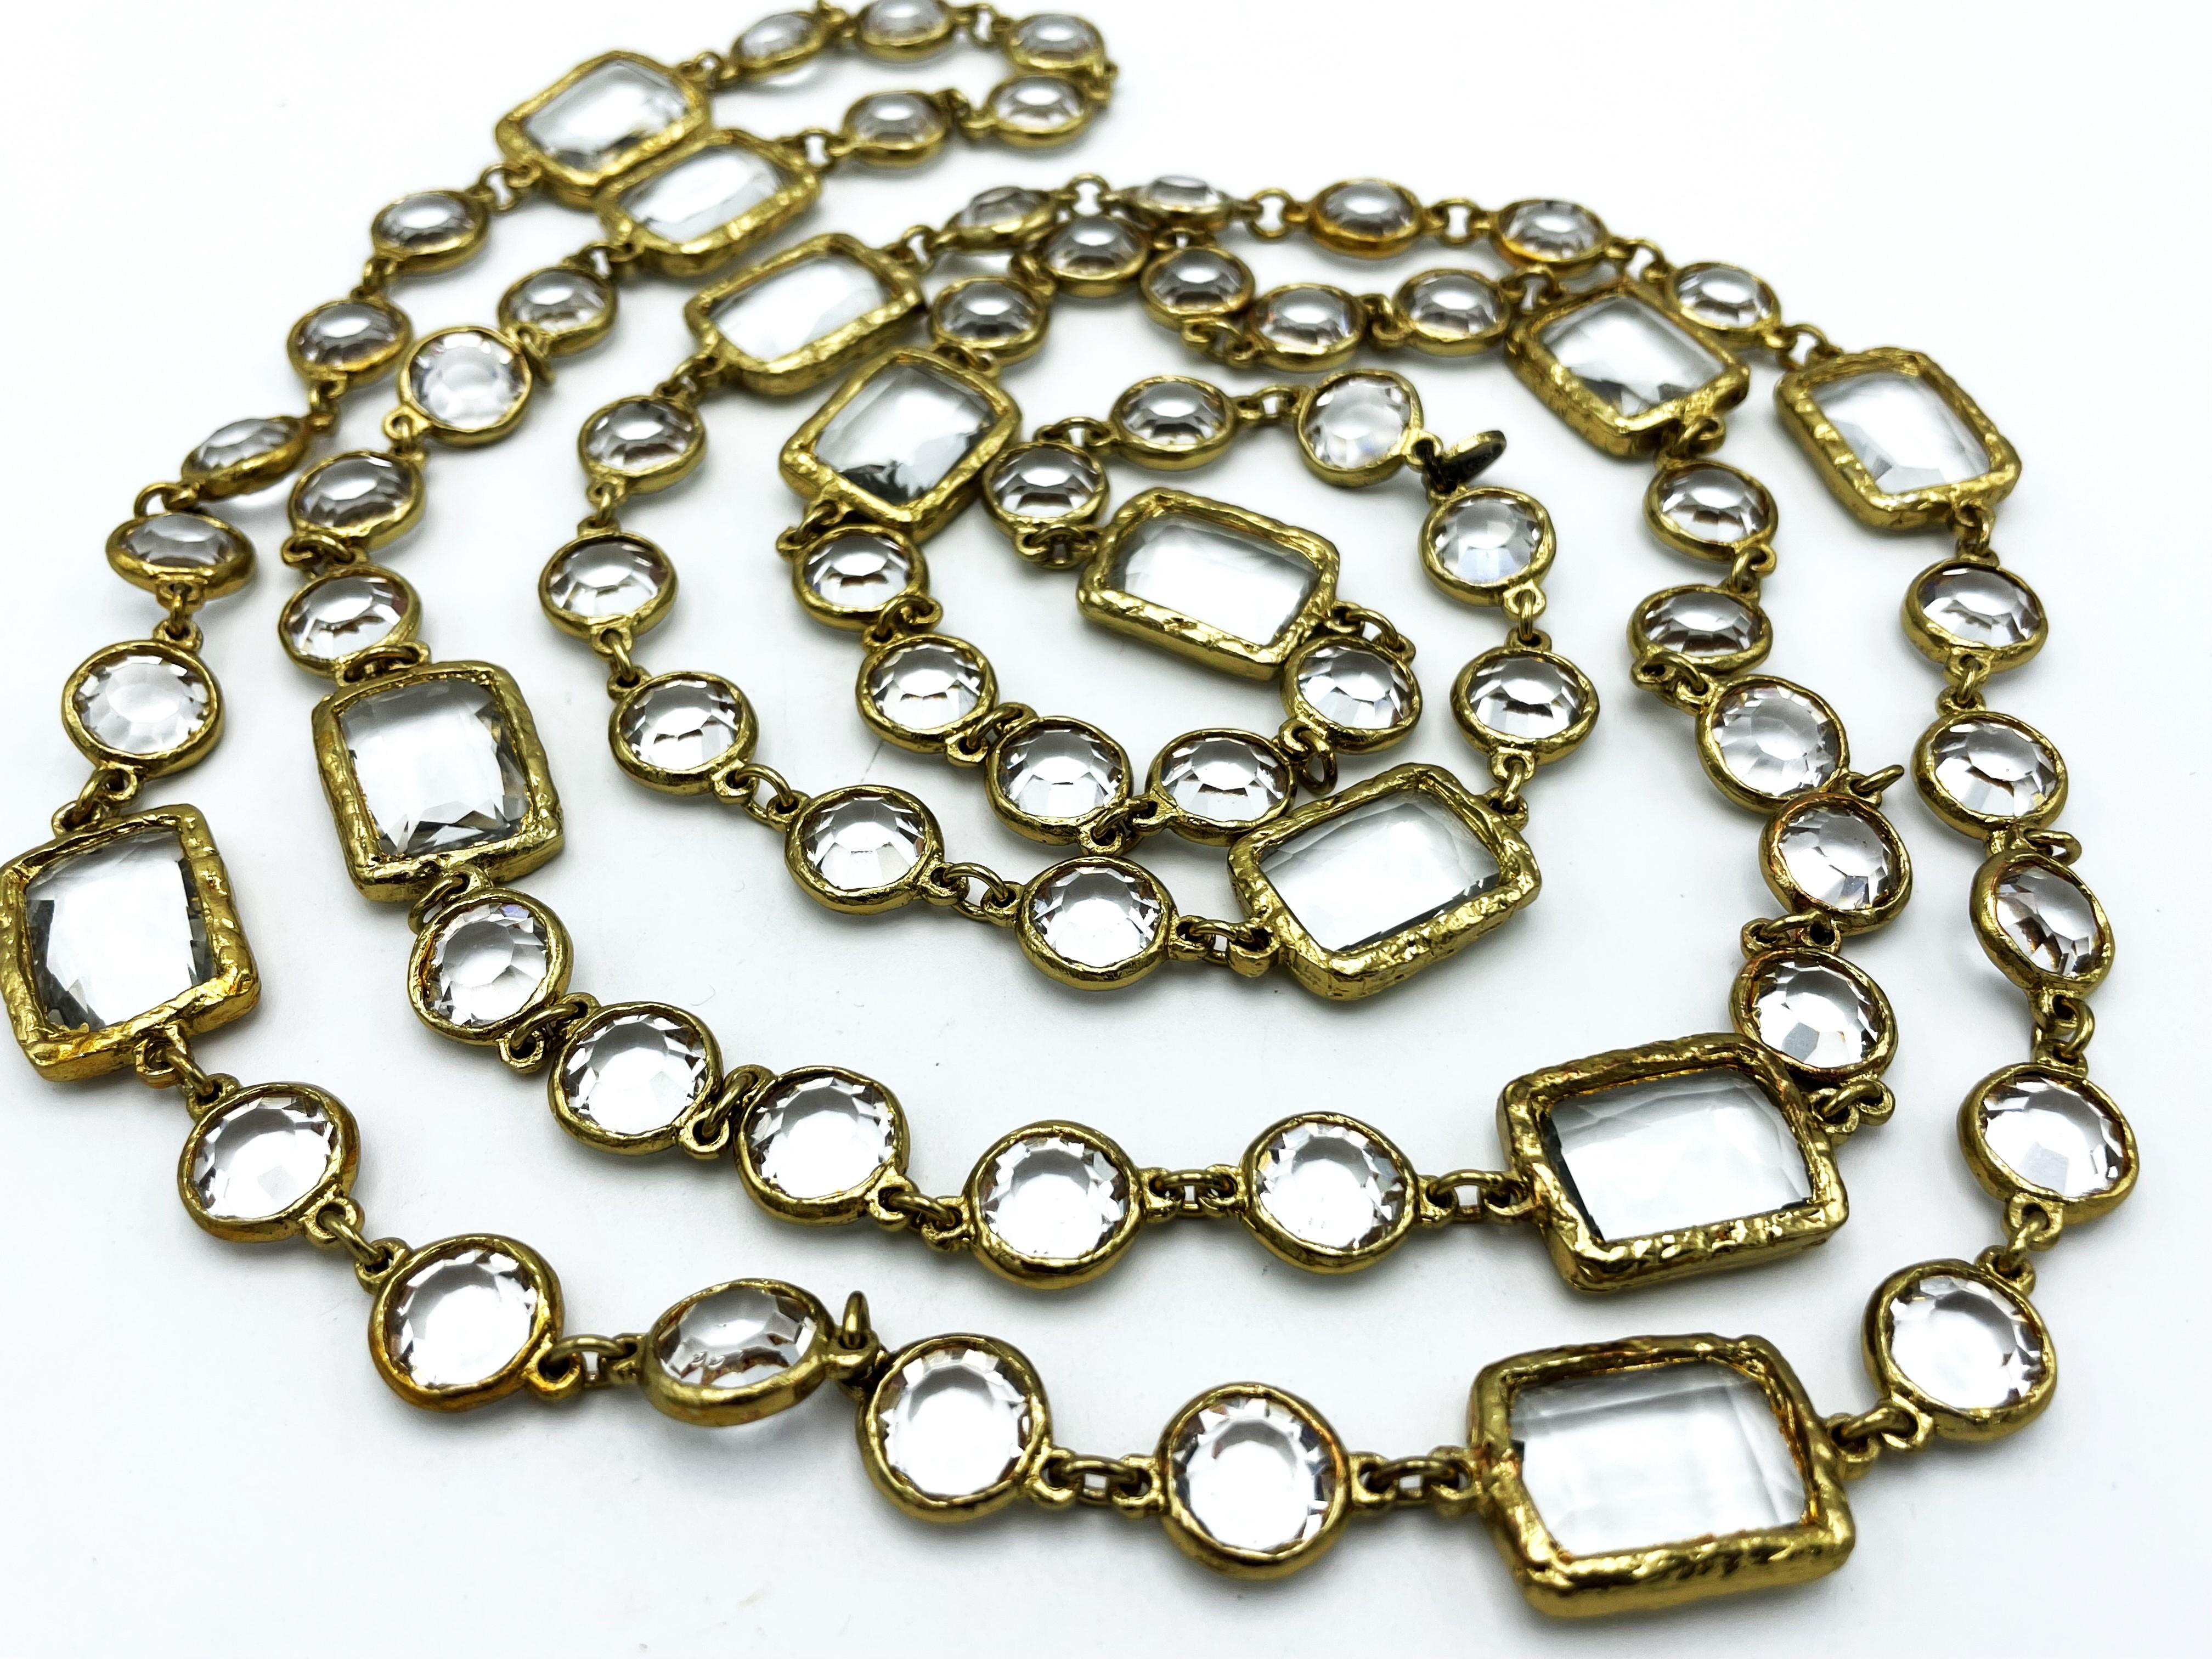 Women's Vintage CHANEL Necklace/Sautoir with 12 clear Chicklets, signed 1981, gold plate